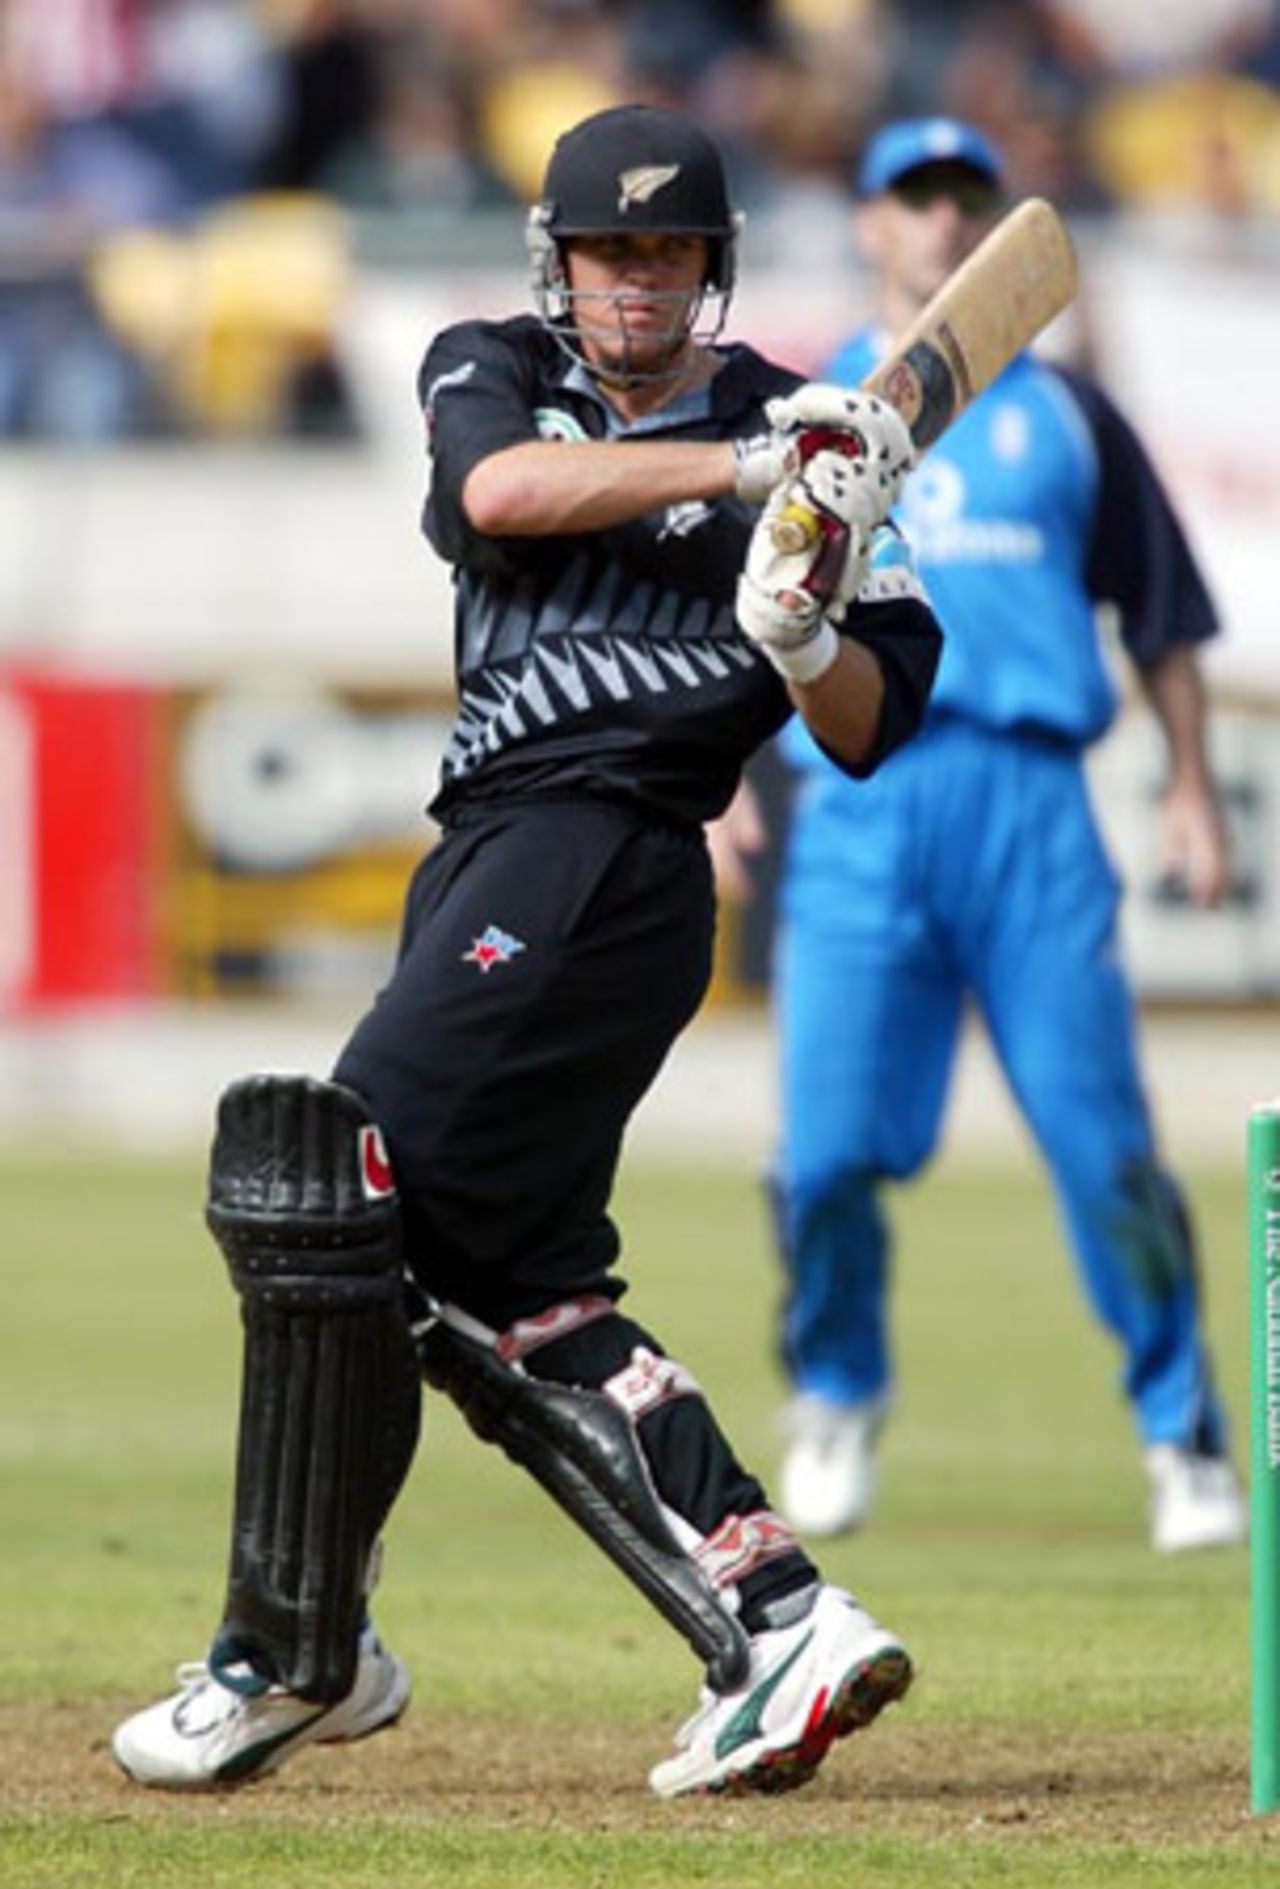 New Zealand batsman Lou Vincent pulls a delivery from England bowler Matthew Hoggard during his innings of 36. 2nd ODI: New Zealand v England at WestpacTrust Stadium, Wellington, 16 February 2002.